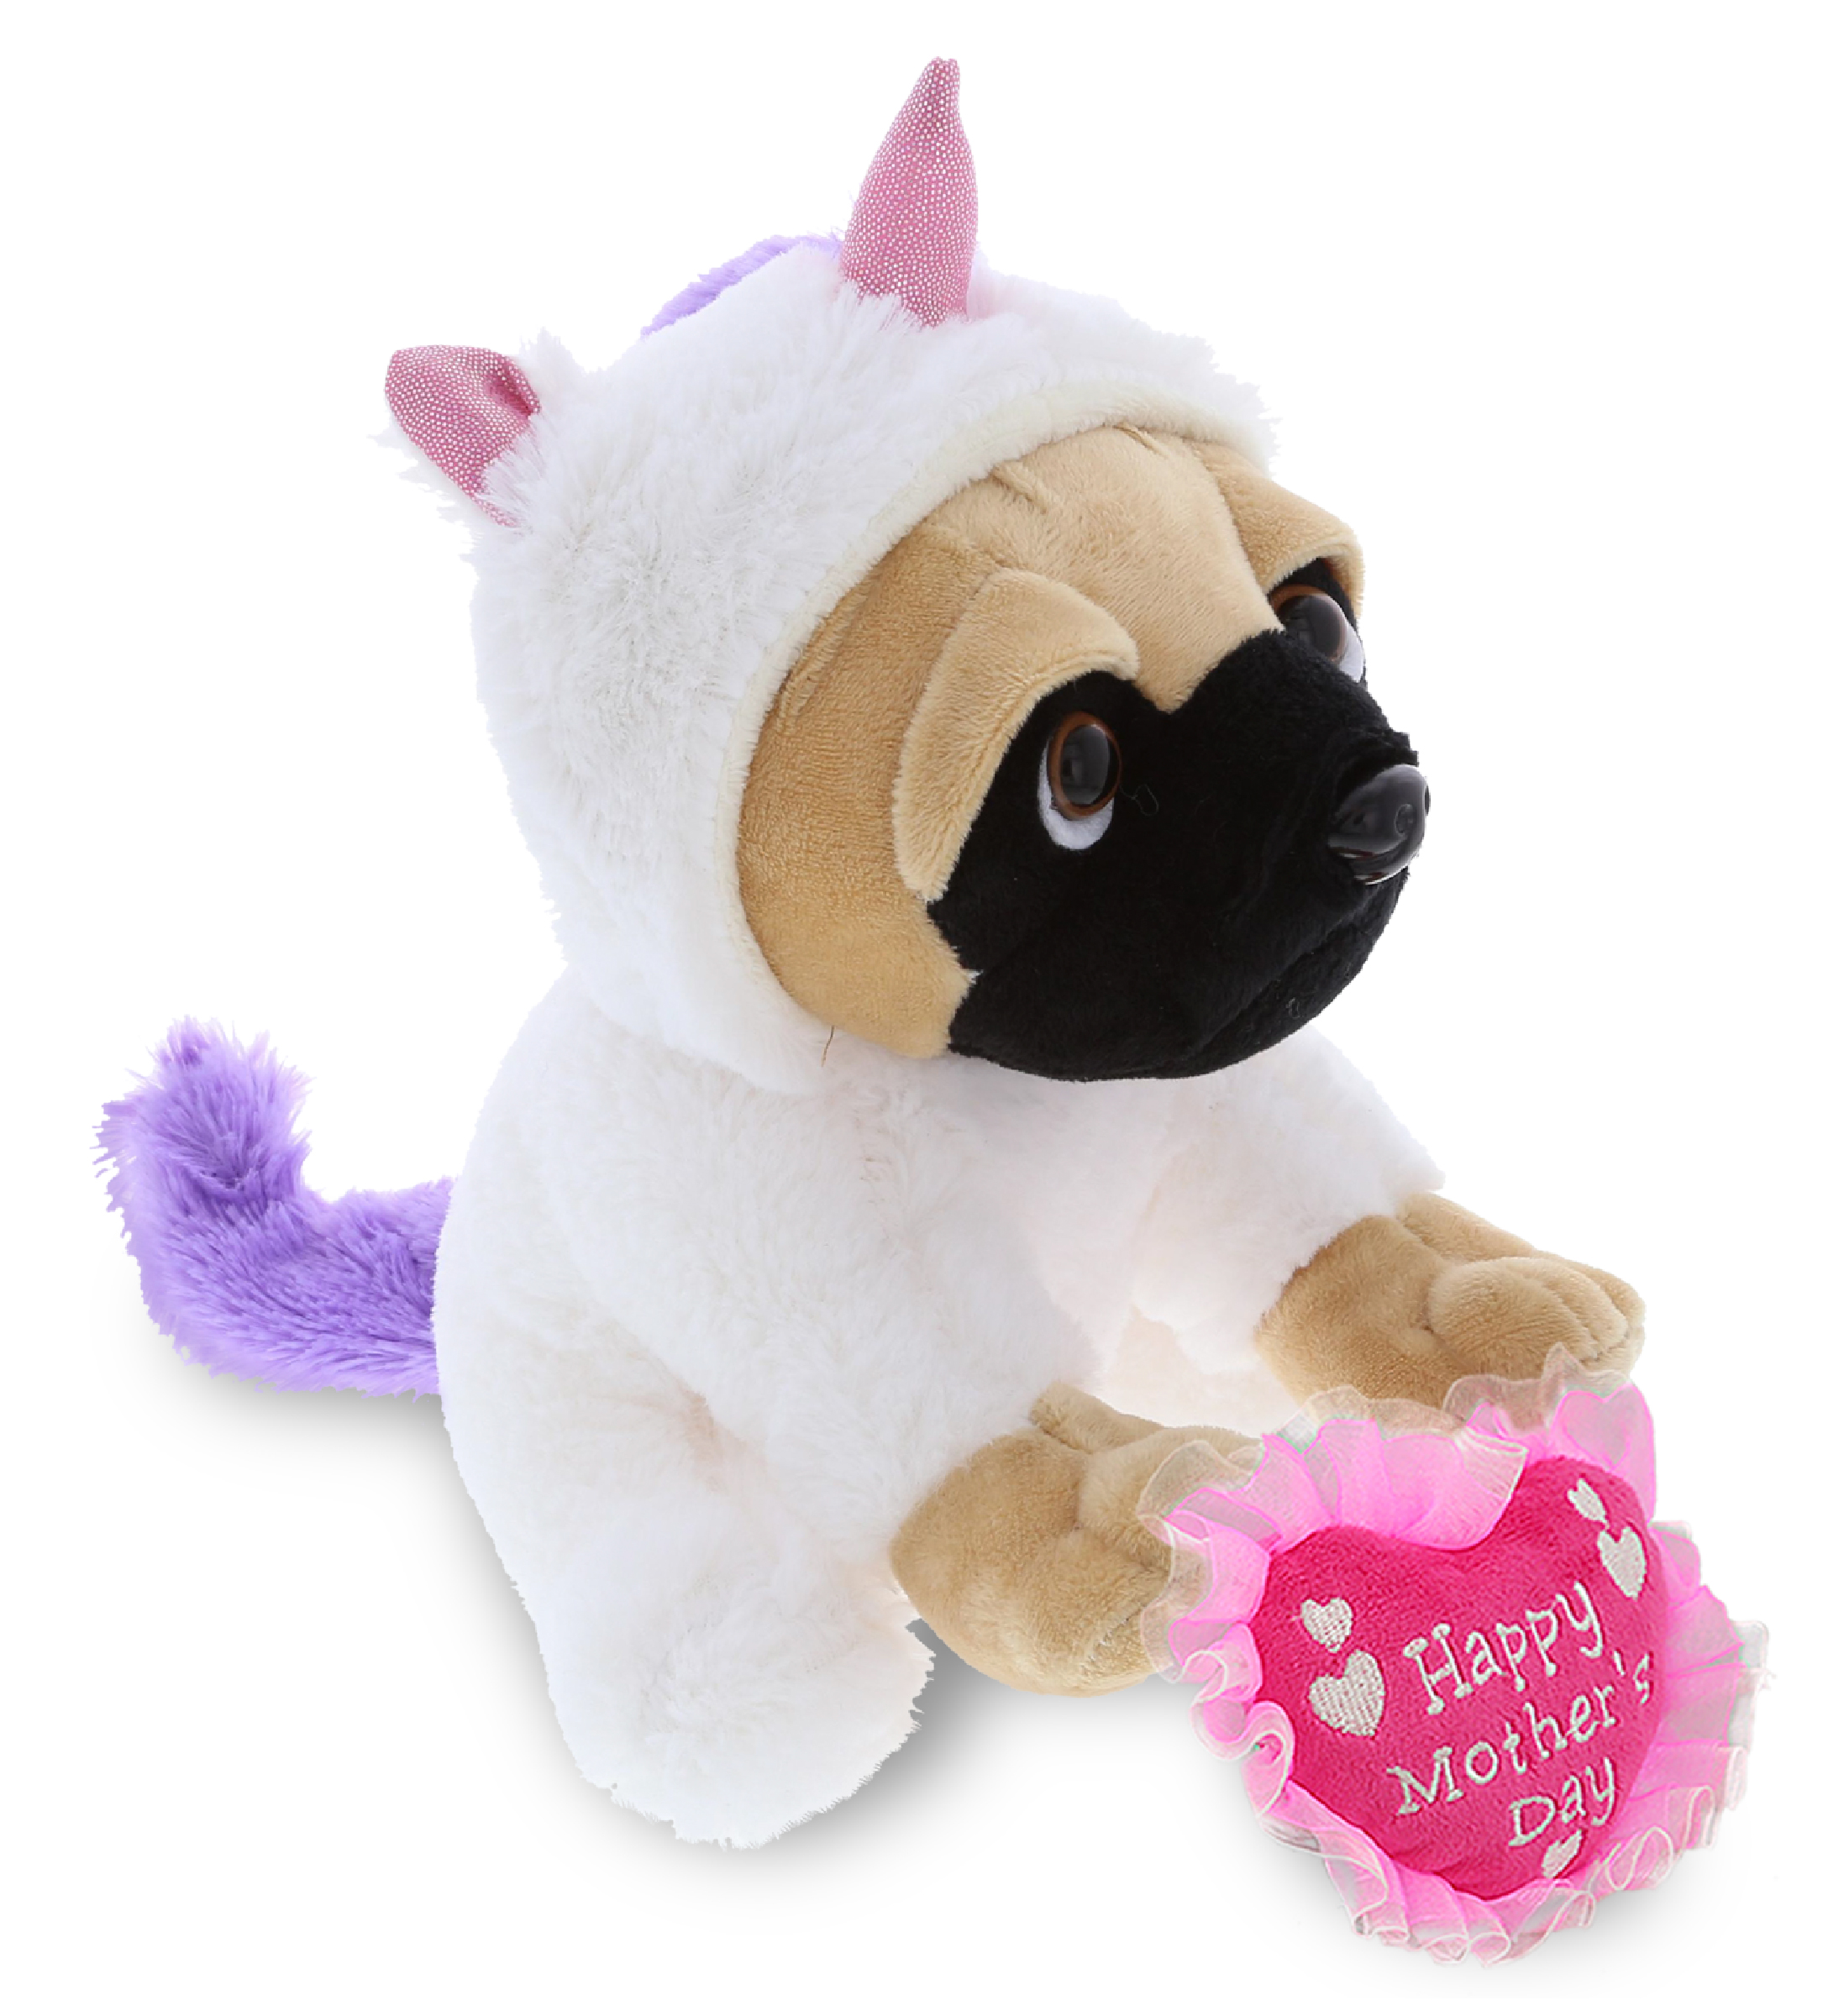 DolliBu Happy Mother's Day Super Soft Pug Dog Unicorn Plush Figure - Stuffed Animal with Pink Heart Message for Best Mommy, Grandma, Wife, Daughter - Dog Pet with Unicorn Costume Plush Toy - 6.5" Inch - image 1 of 6